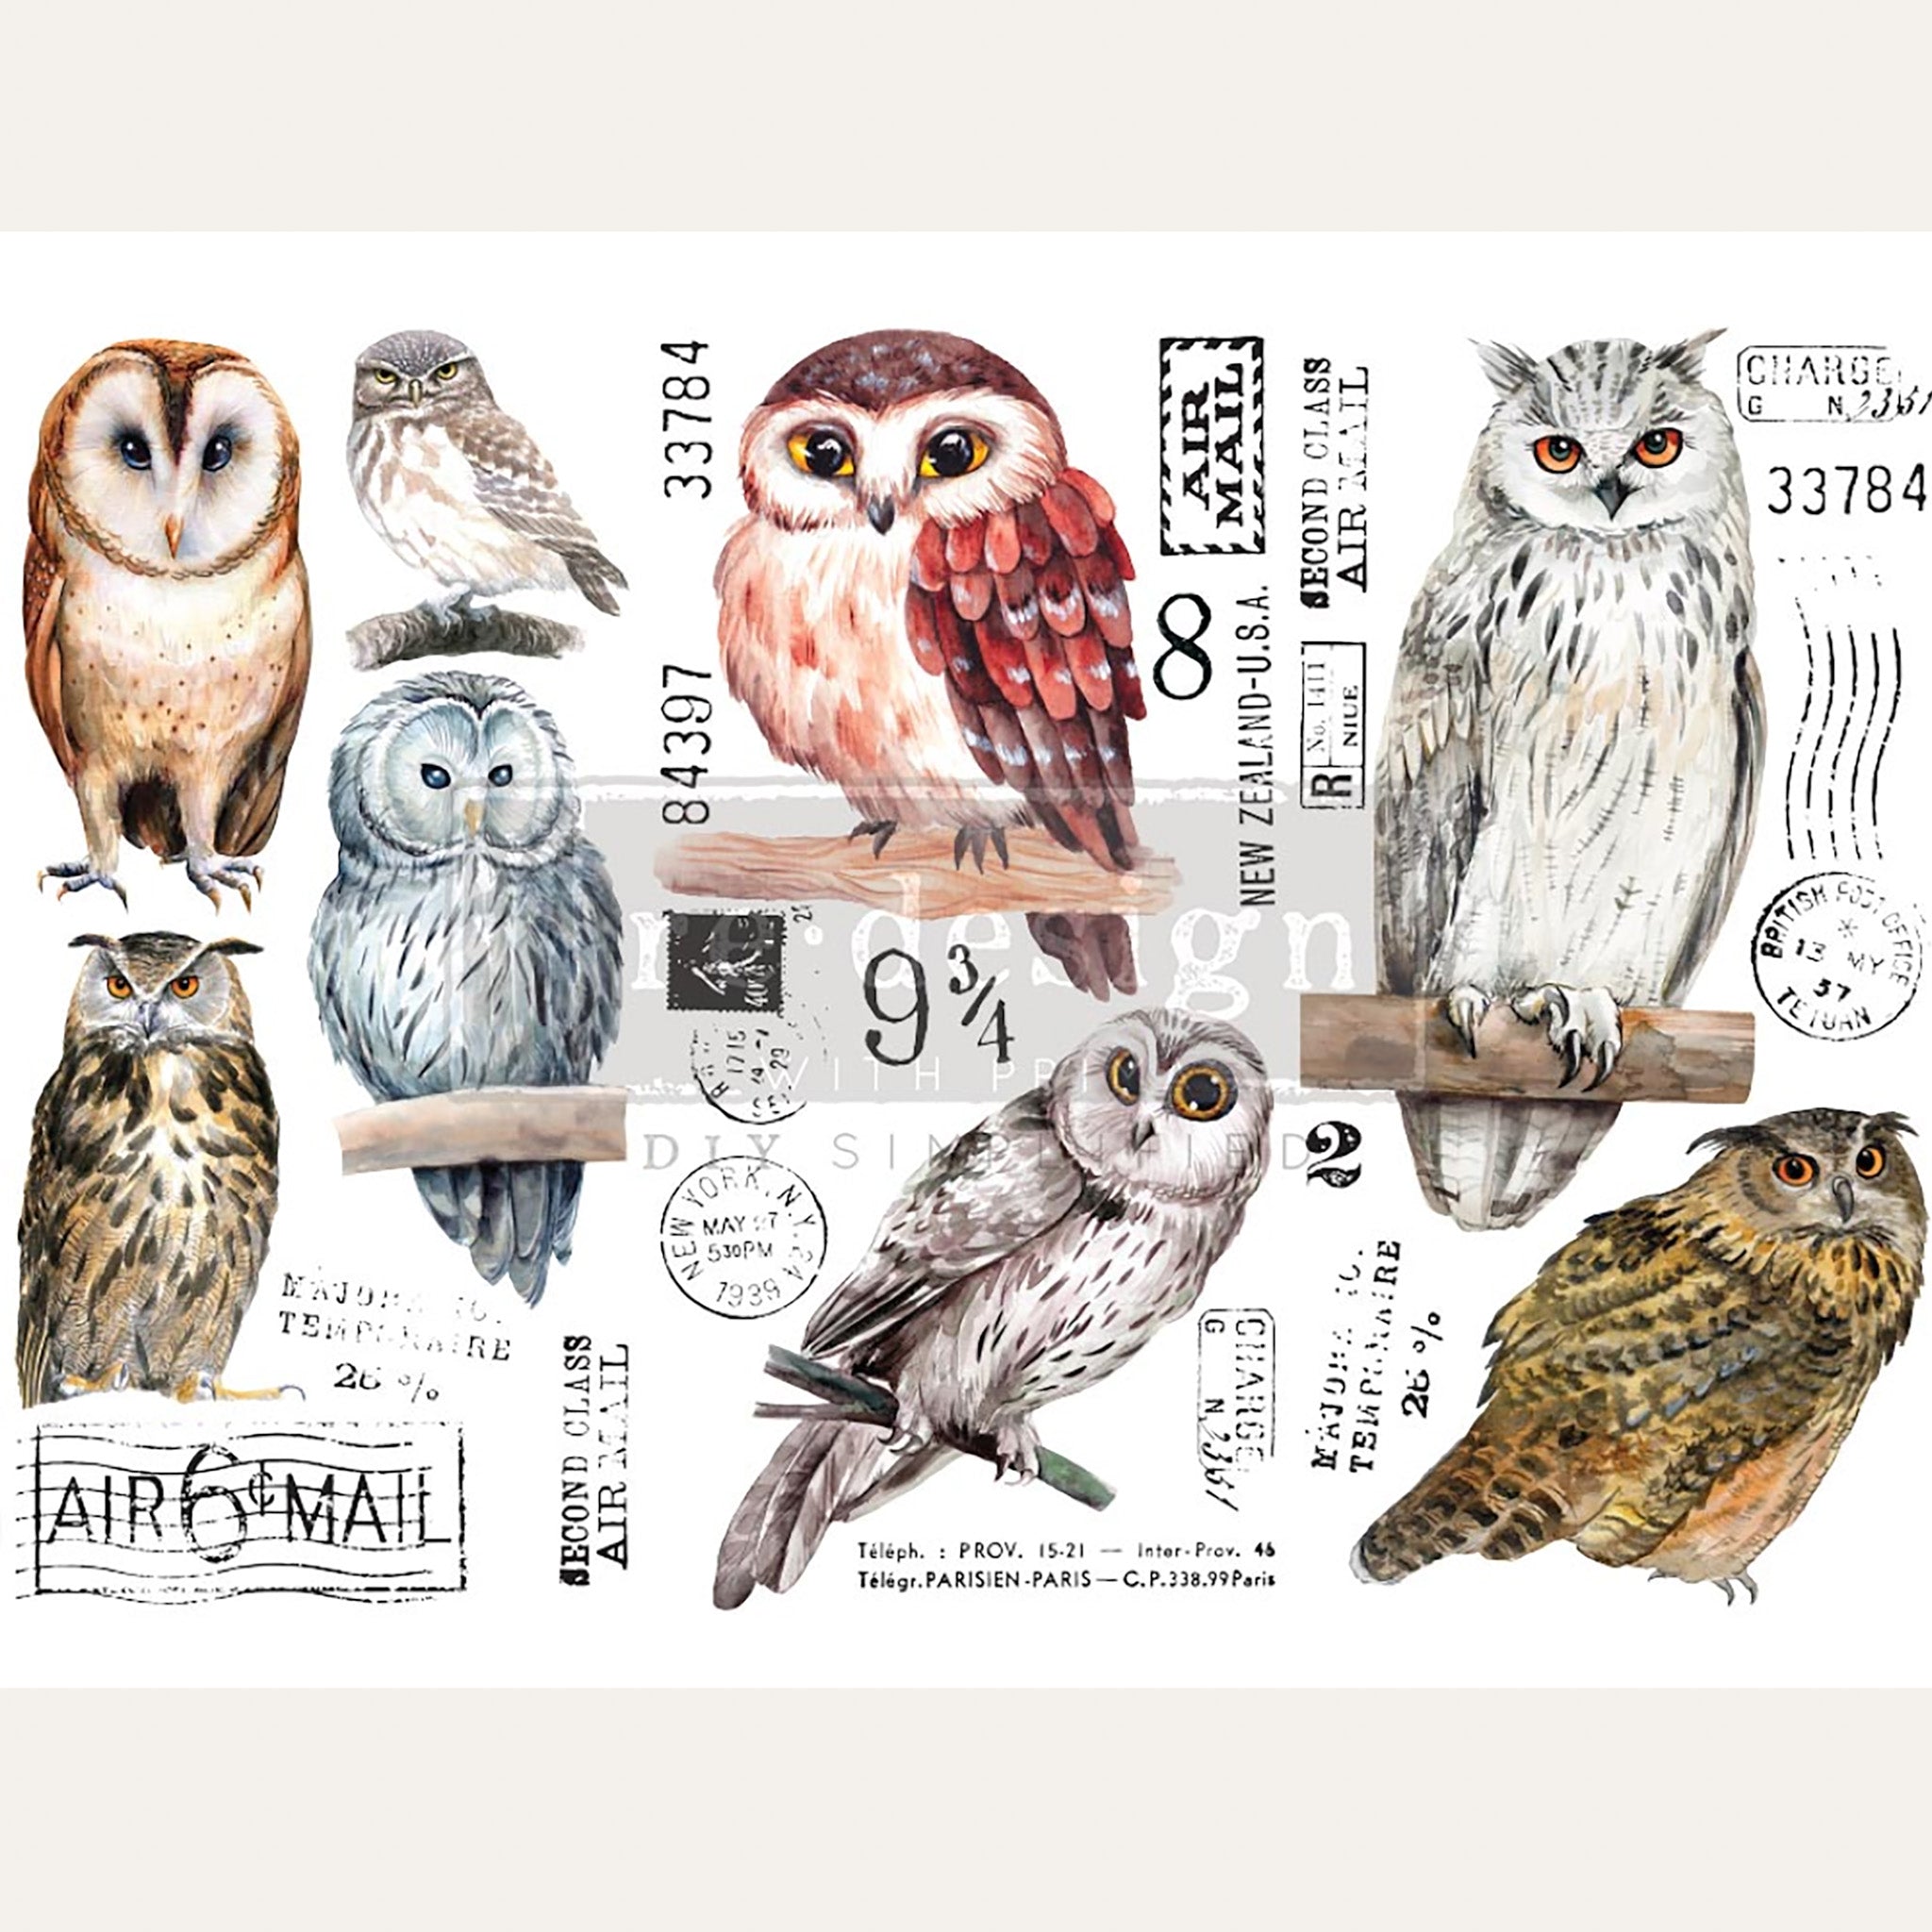 Small rub-on transfer design of owls and postage stamp marks. White borders are on the top and bottom.